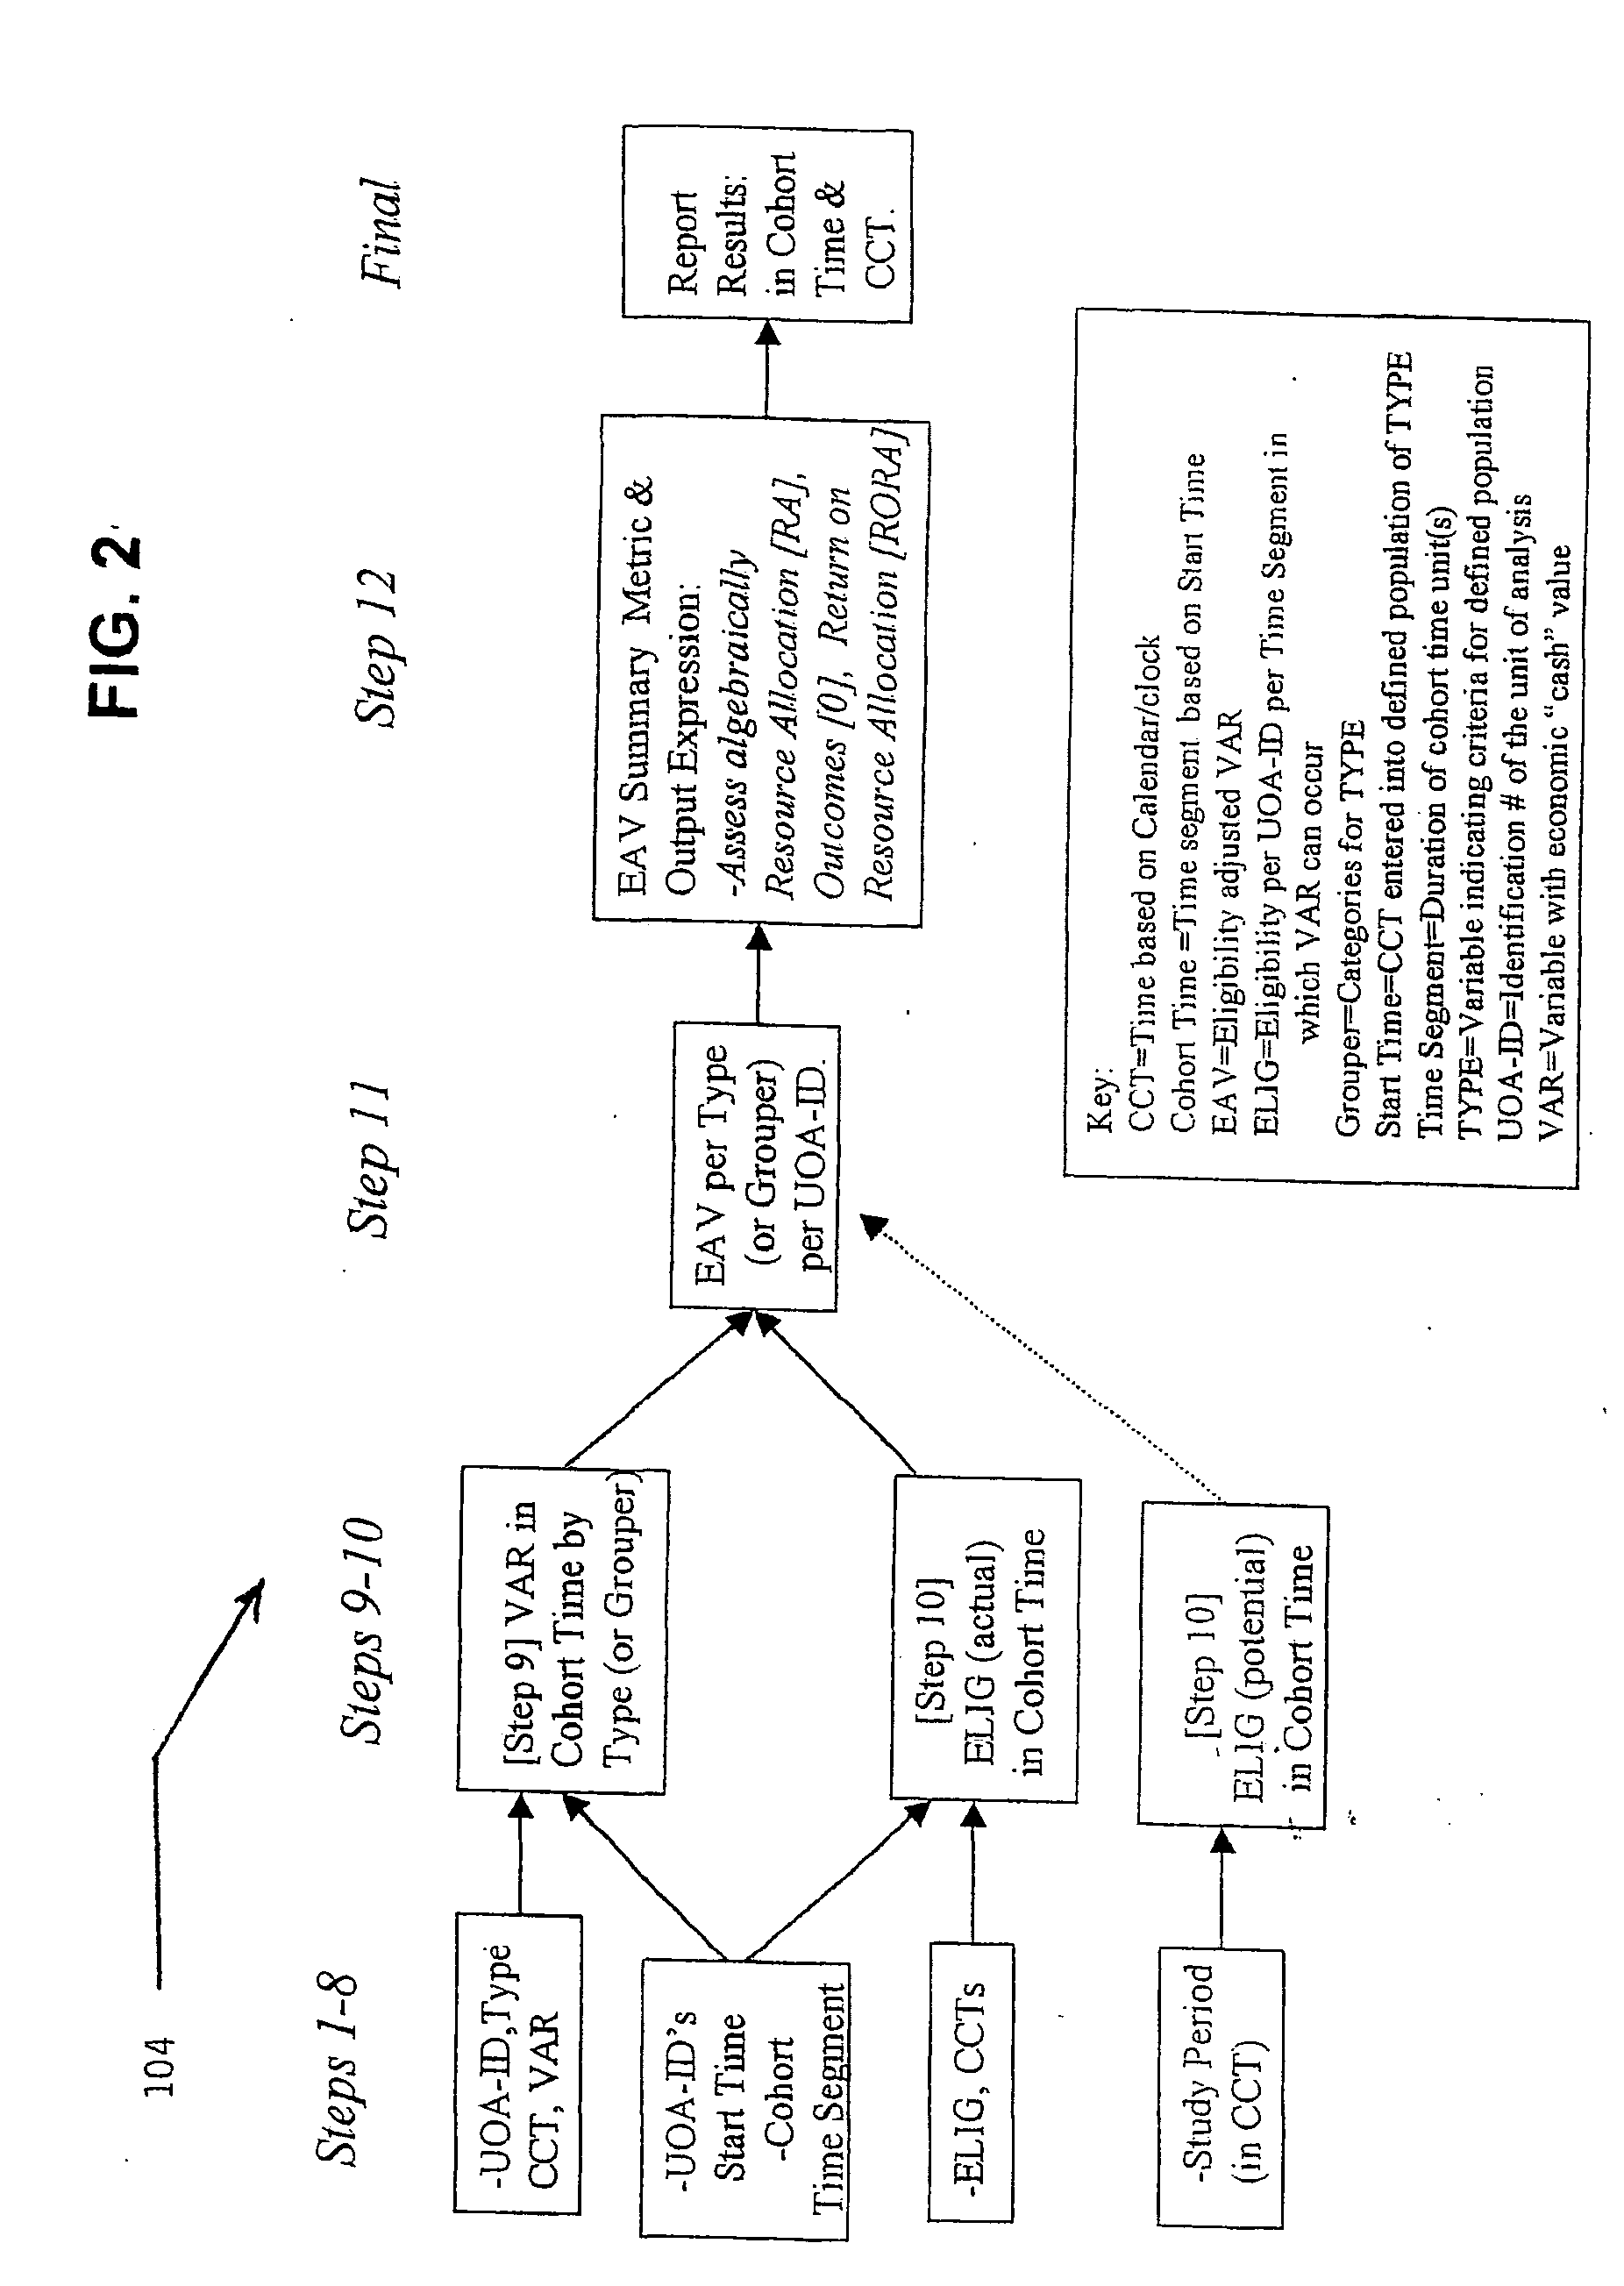 Method and system for analyzing resource allocation